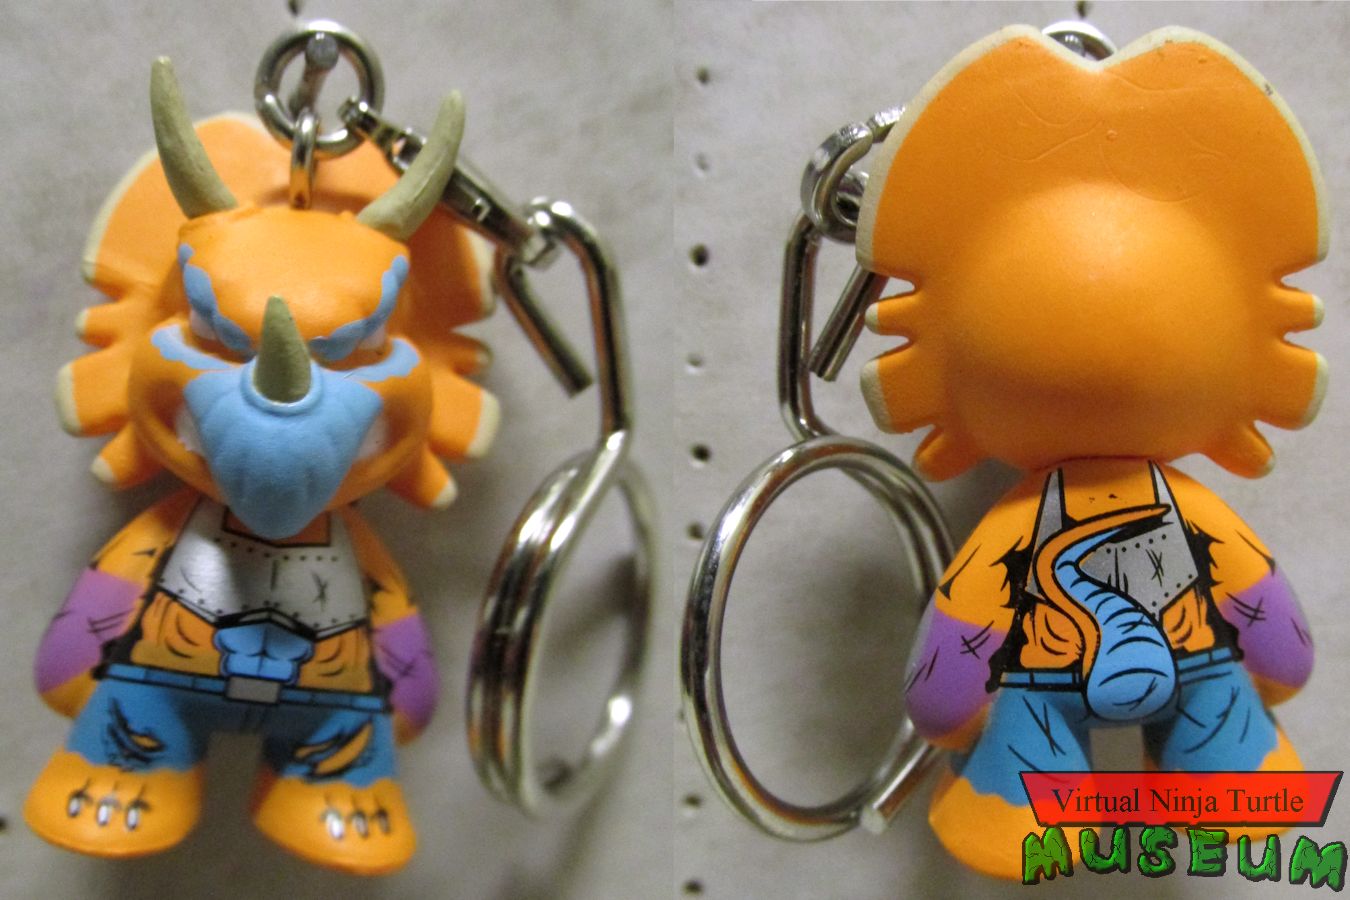 Triceraton keychain front and back